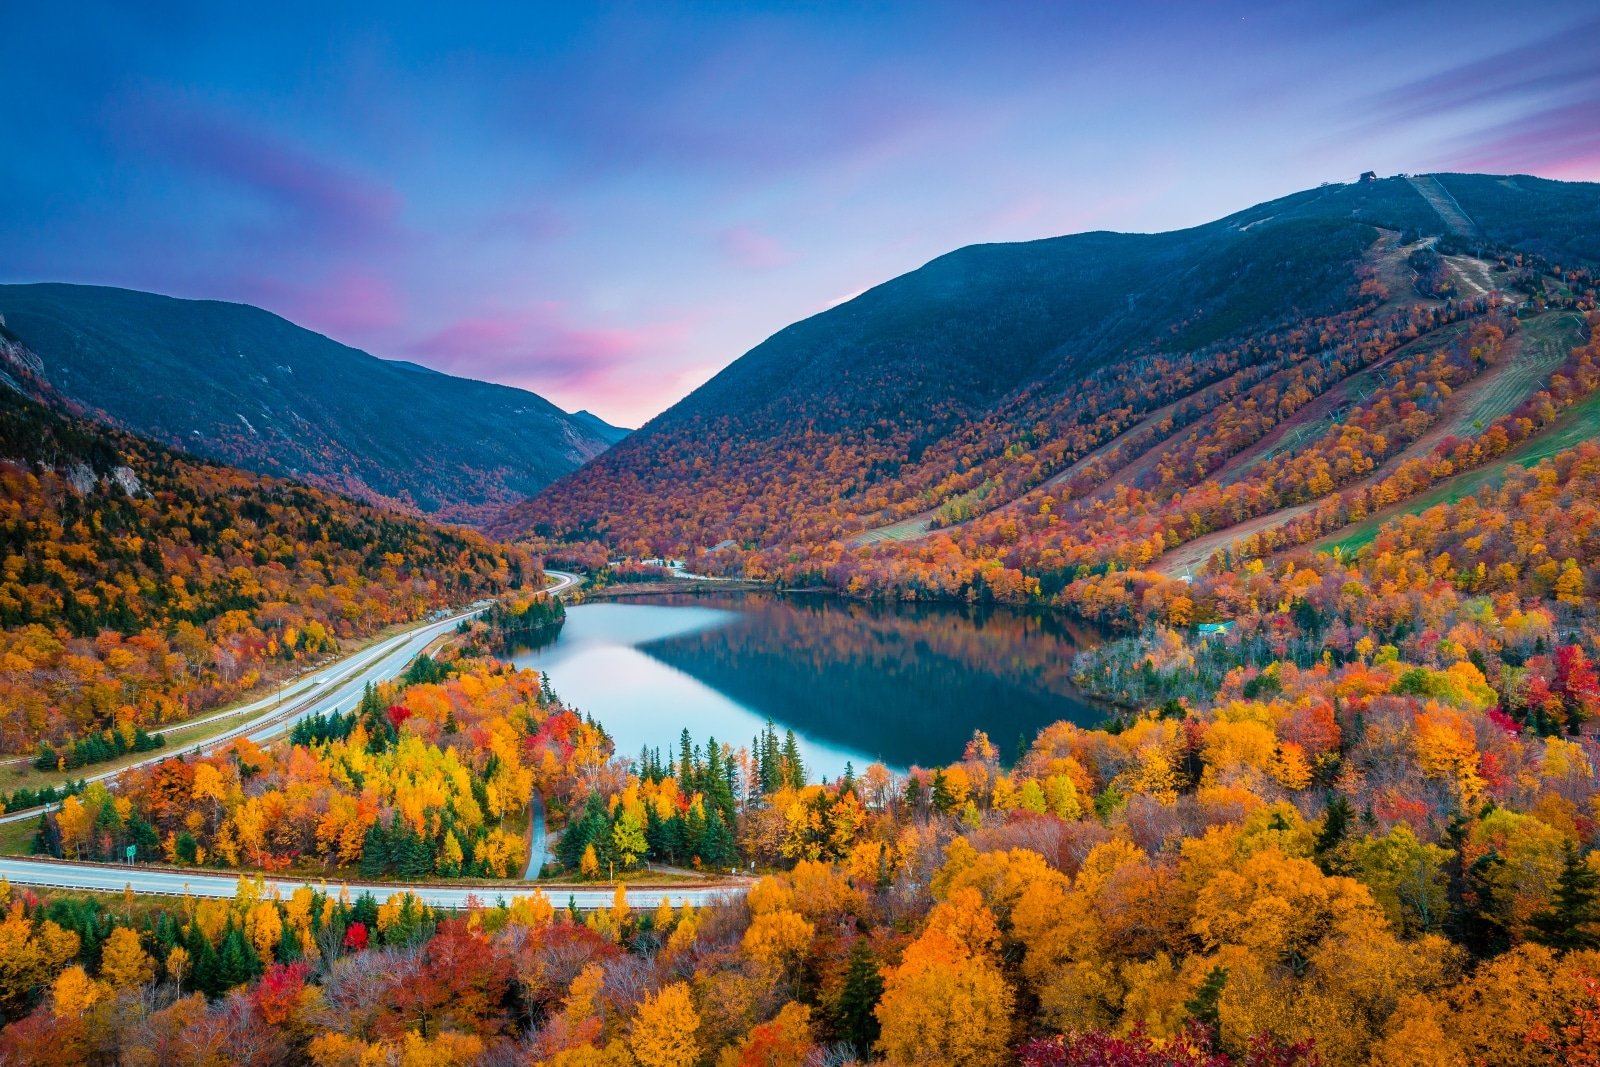 <p class="wp-caption-text">Image Credit: Shutterstock / Winston Tan</p>  <p>Experience the natural beauty of the White Mountains, with opportunities for hiking, sightseeing, and quaint town visits.</p>